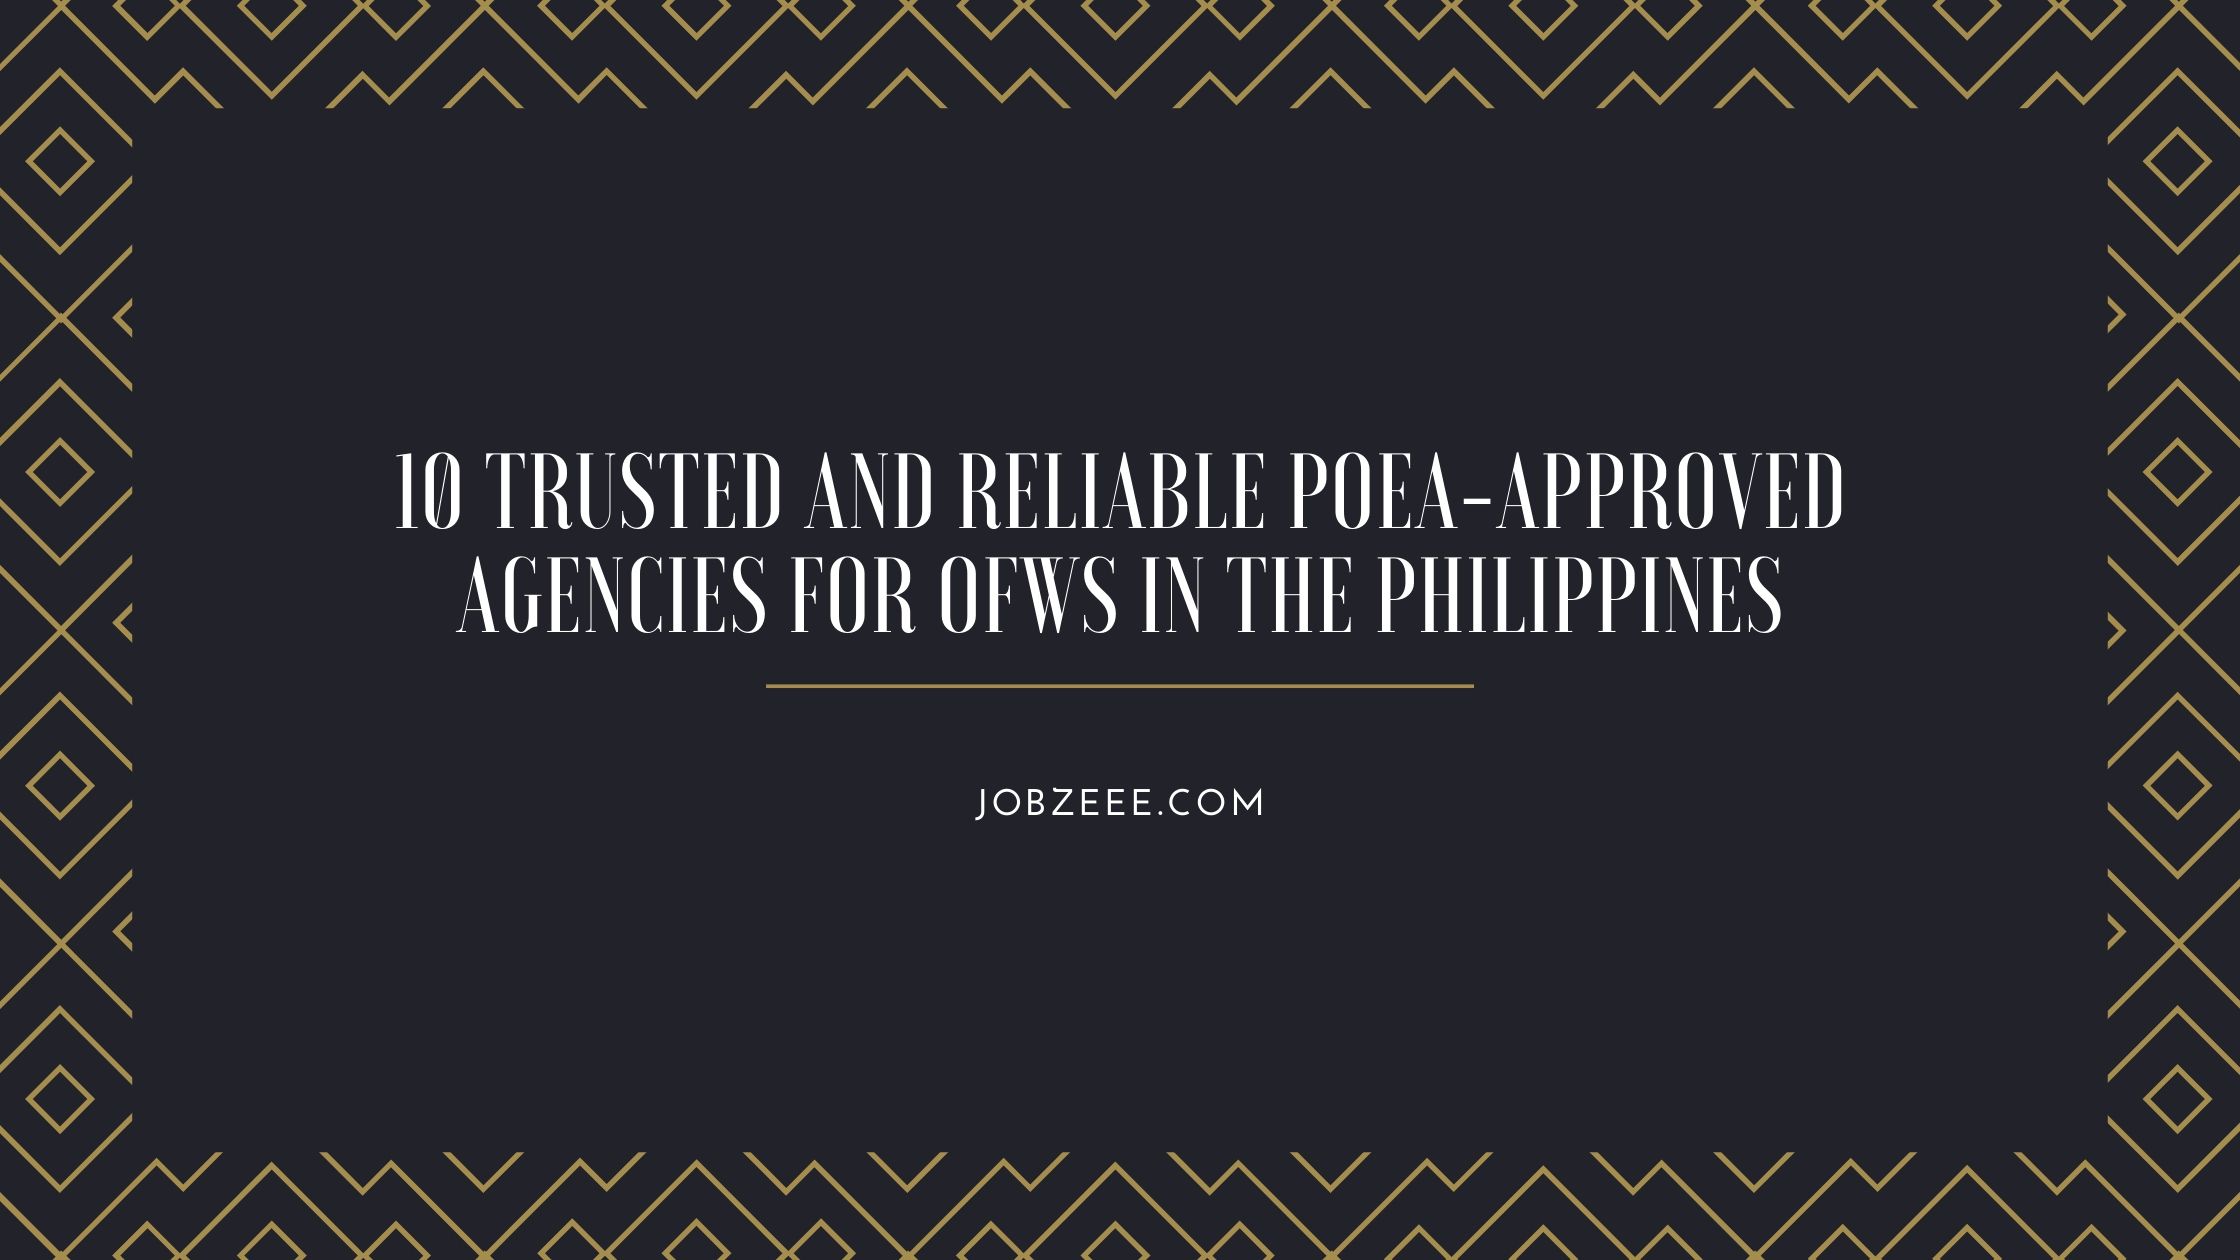 10 TRUSTED AND RELIABLE POEA-APPROVED AGENCIES FOR OFWs IN THE Philippines